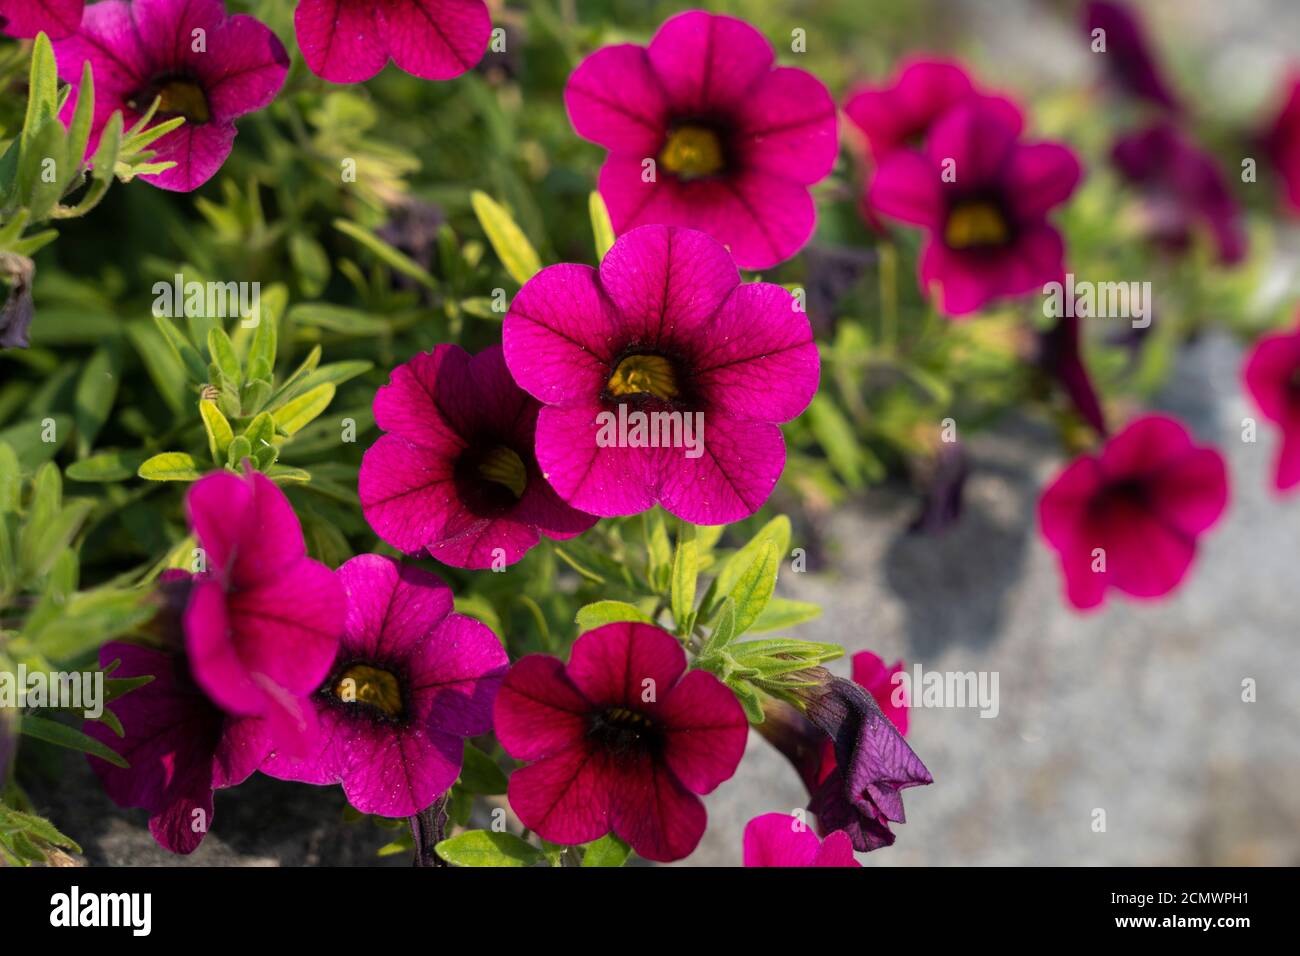 Pink magenta flowers of Calibrachoa parviflora in sunlight, a flowering plant in the nightshade family known by the common name seaside petunia Stock Photo